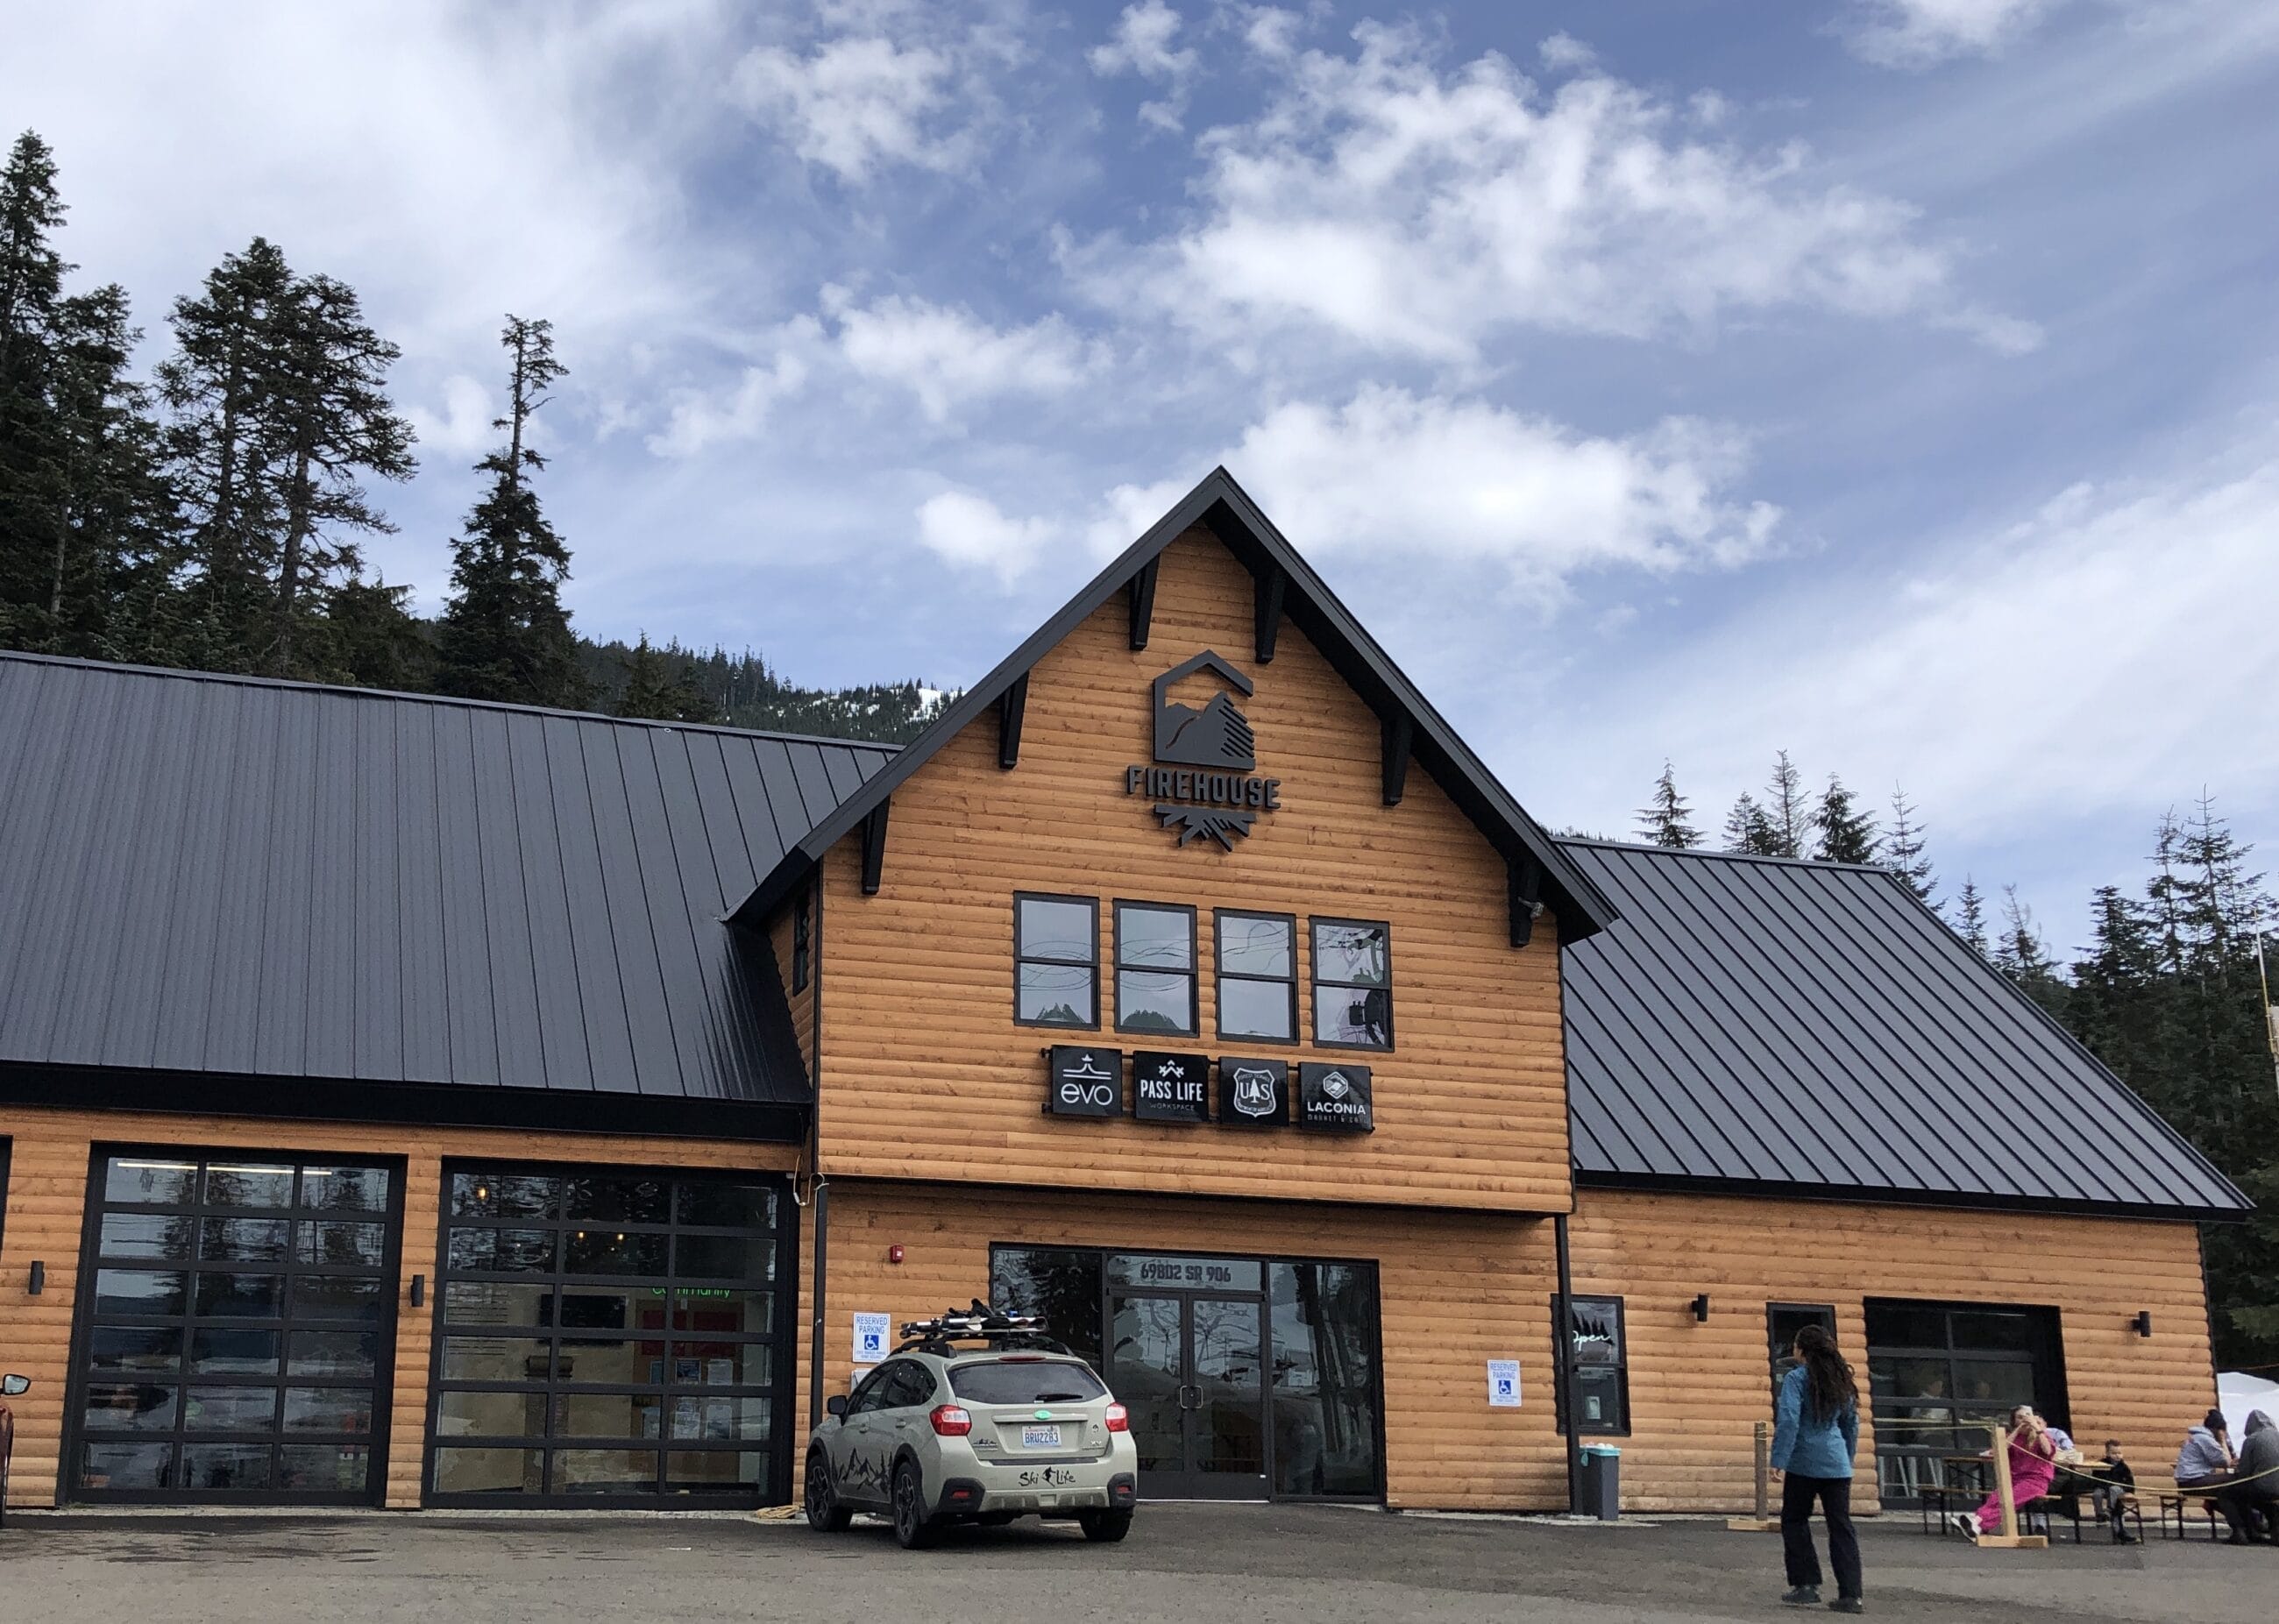 Snoqualmie Pass Visitor Center